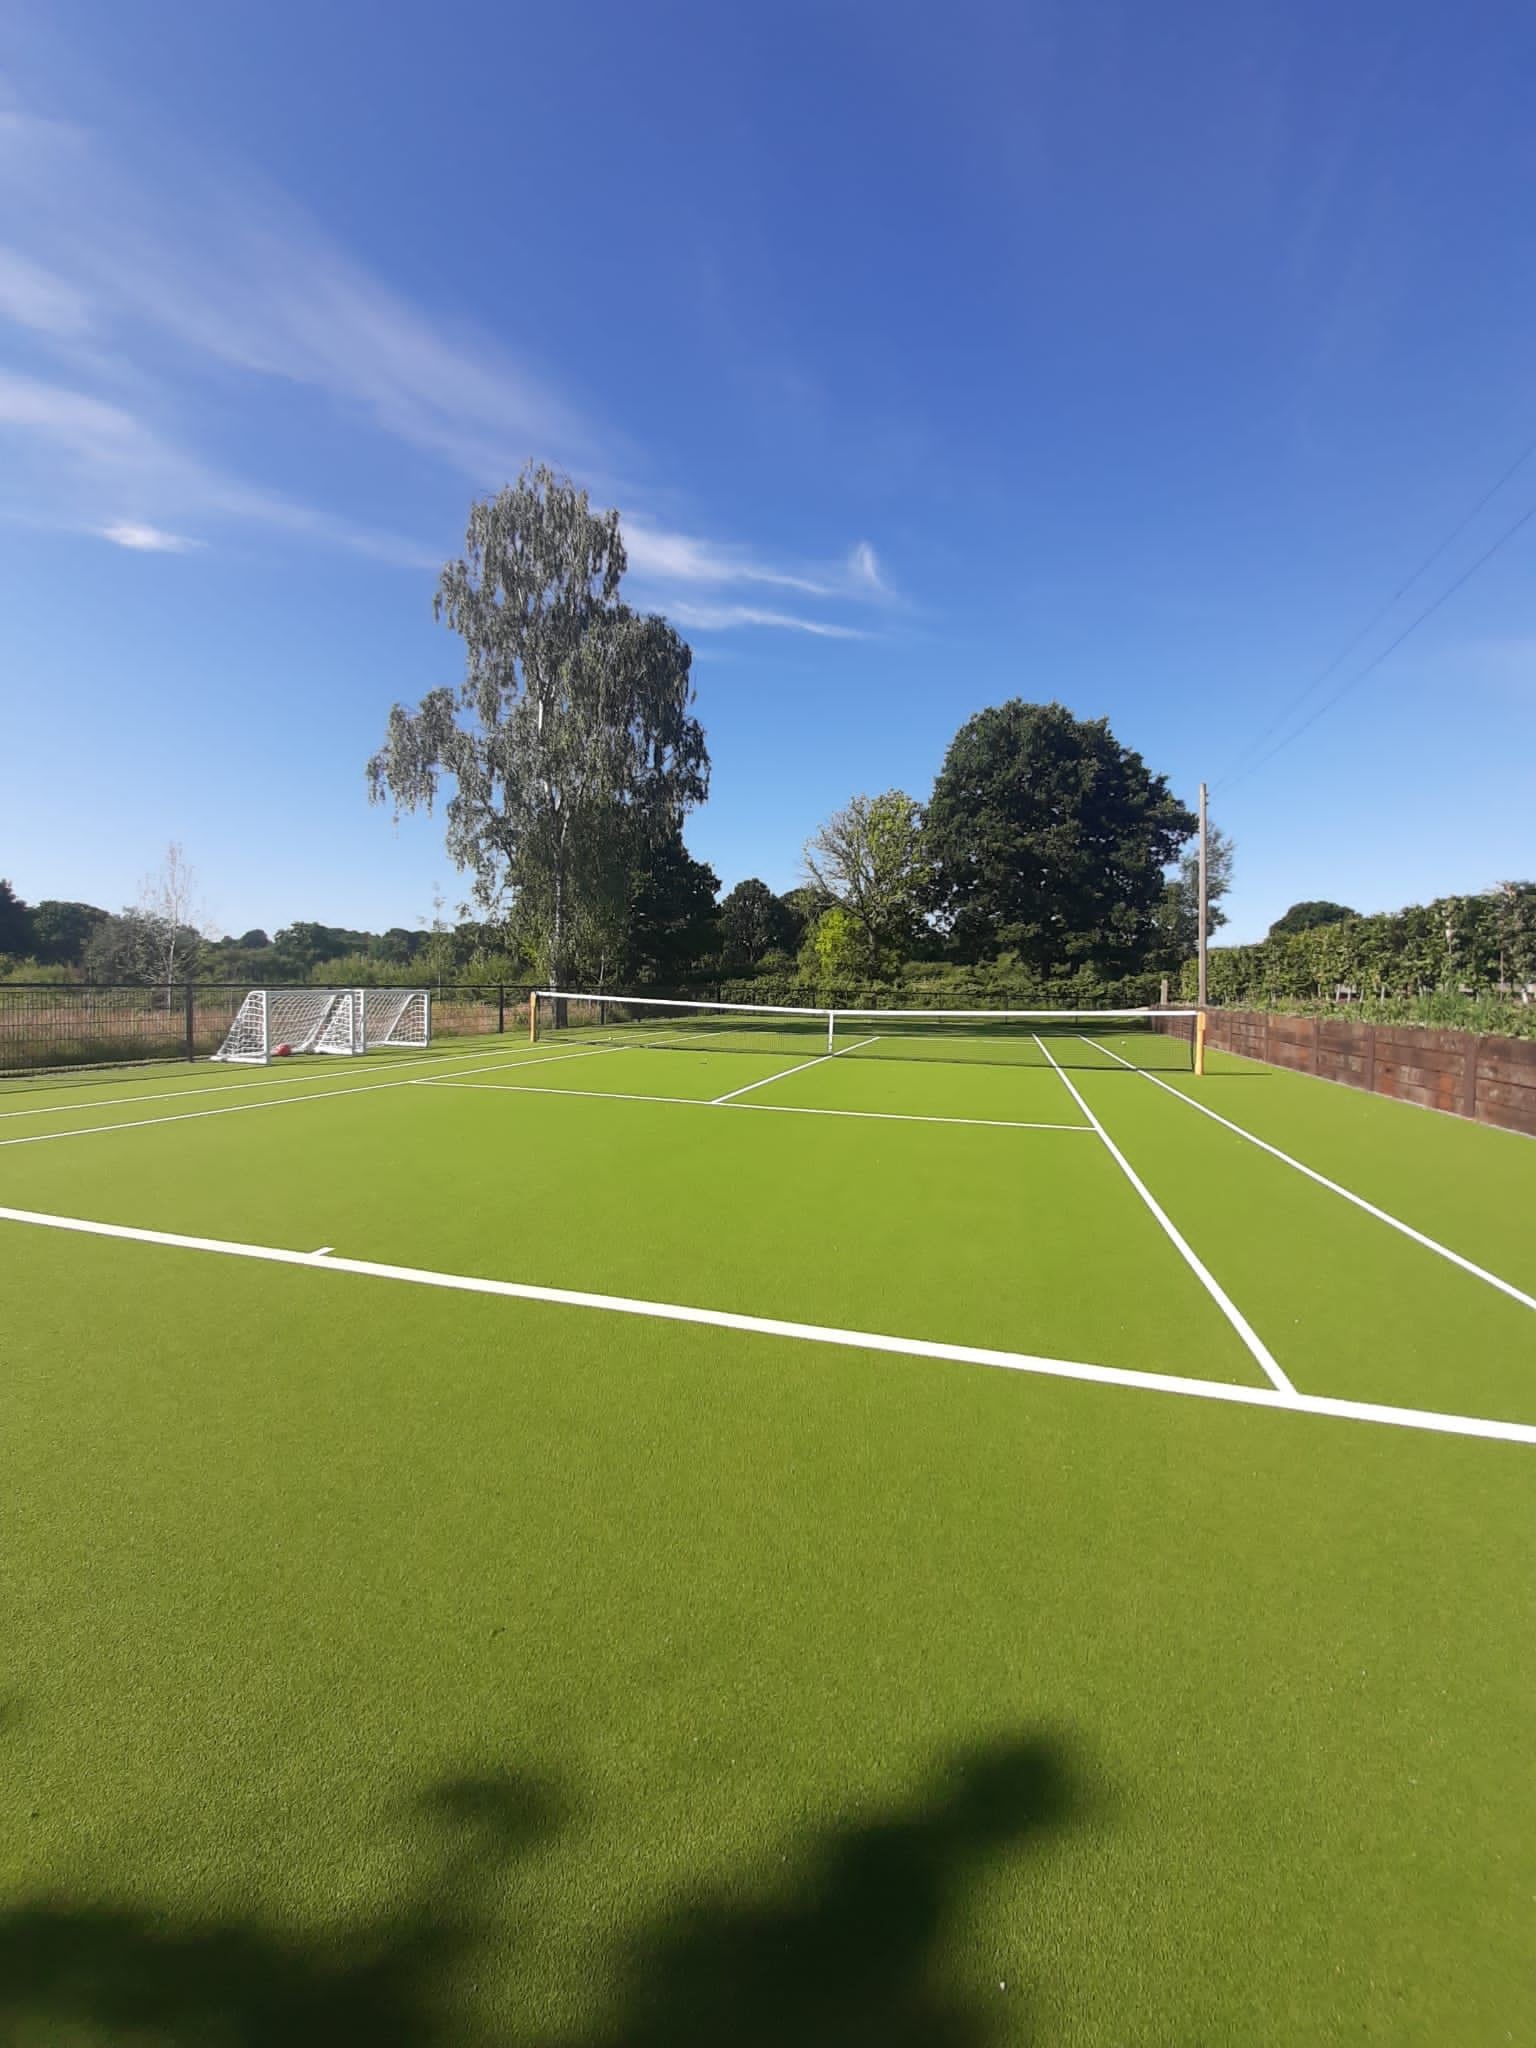 Carpeted tennis court